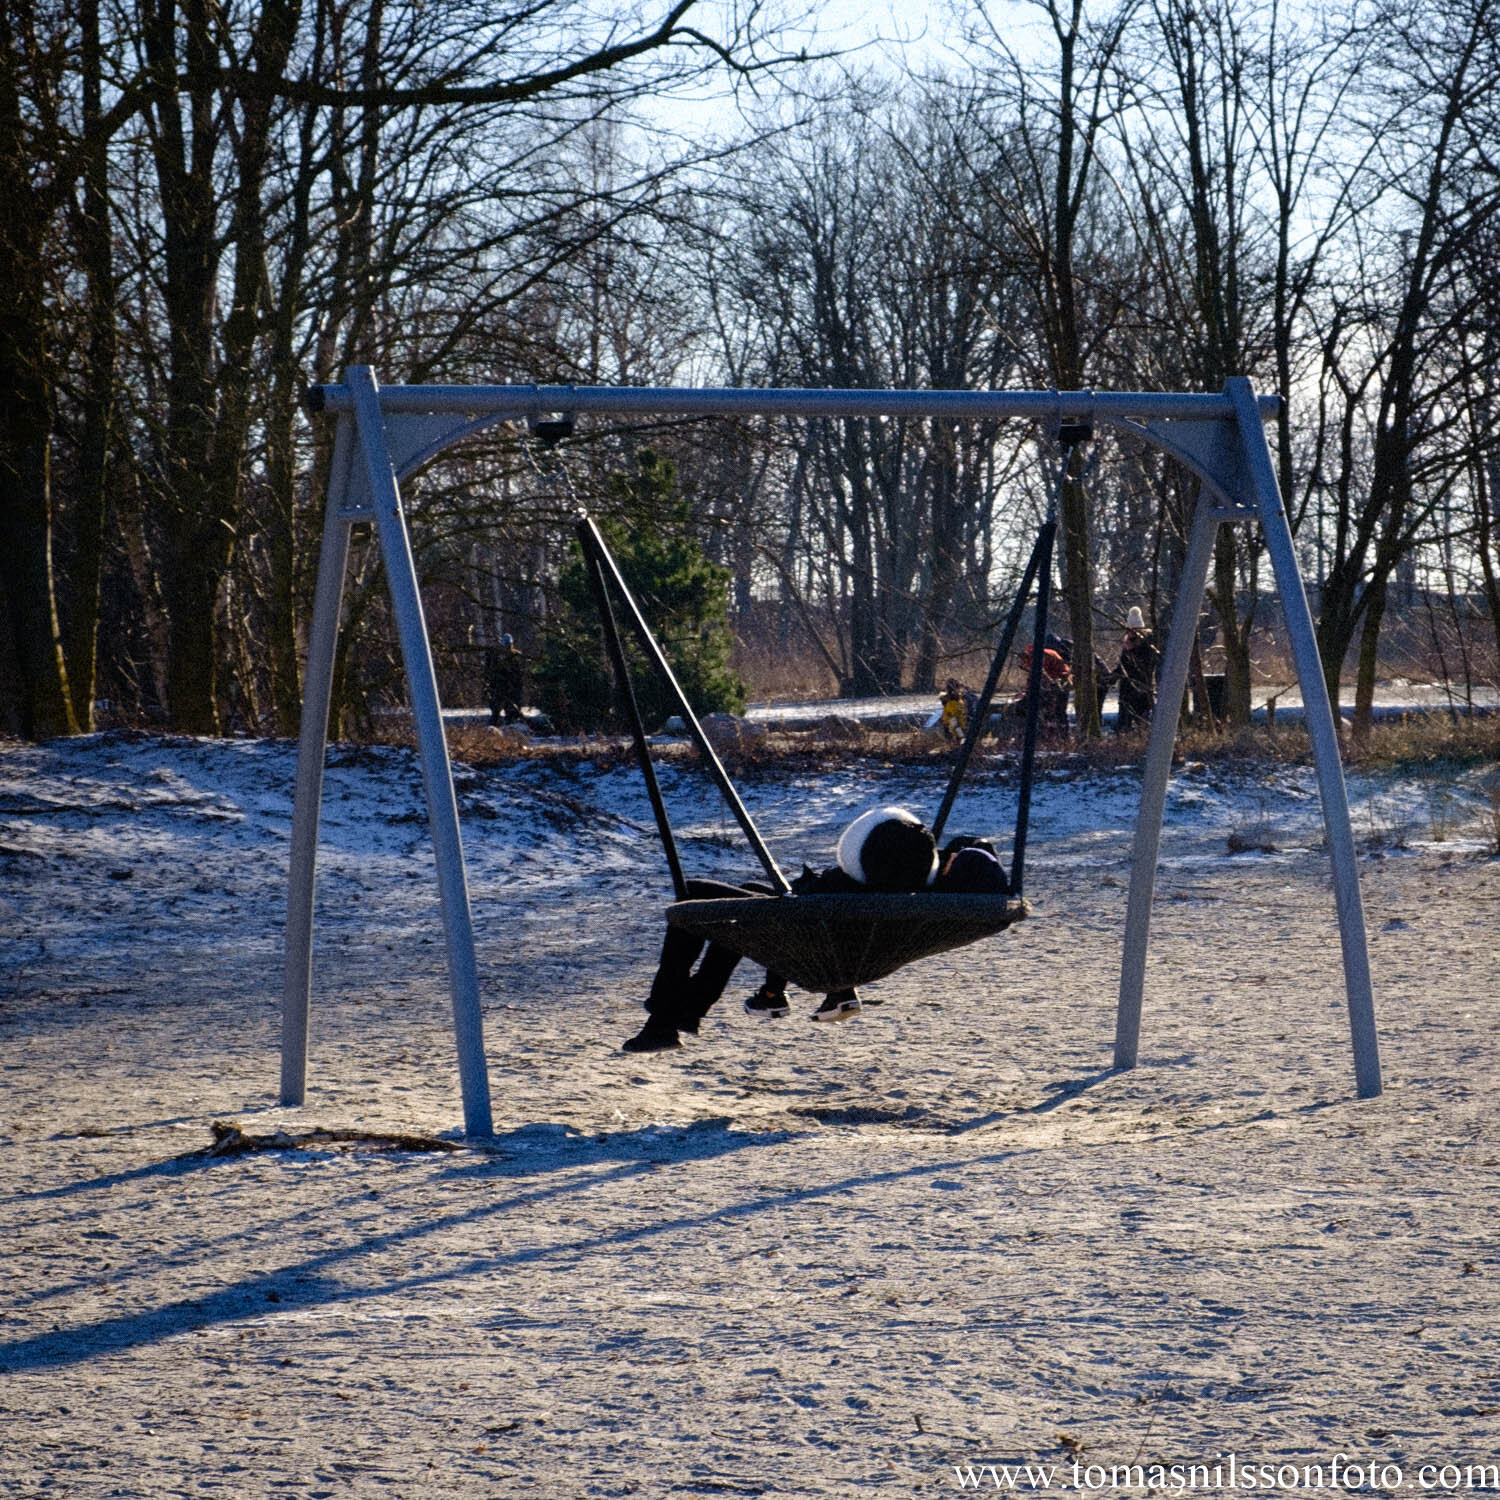 Day 48 - February 17: Swinging with my best friend